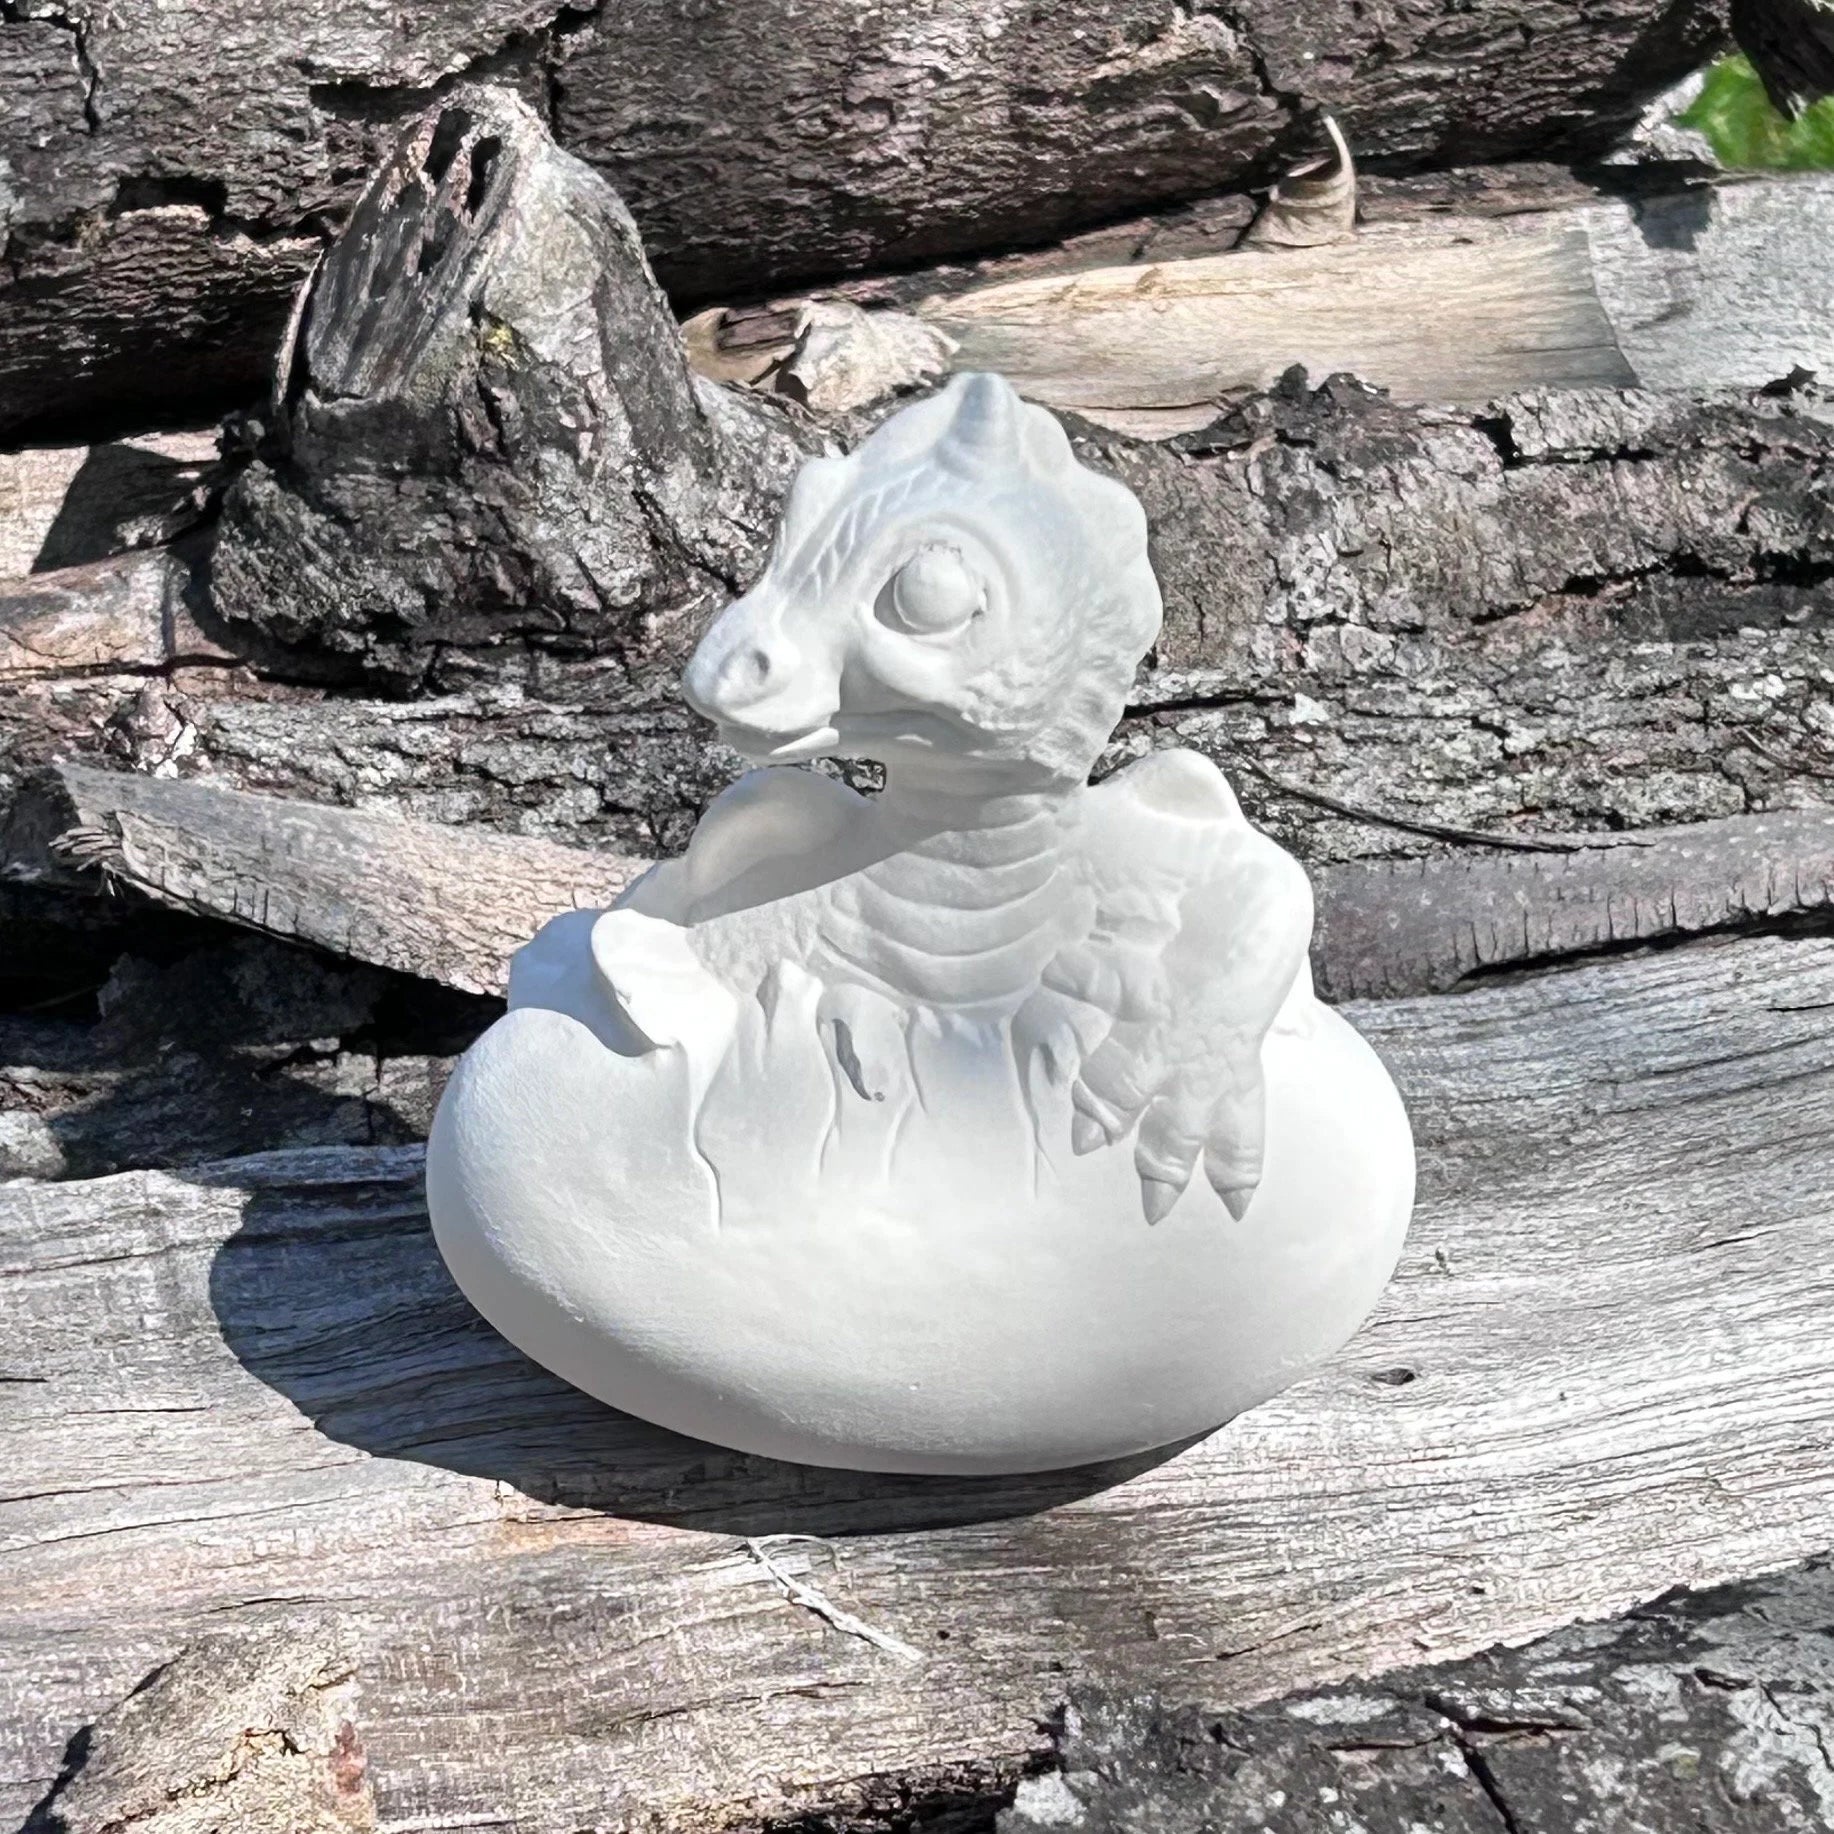 handmade ready to paint baby dragon and egg figurine sitting on a split log in the sunshine.